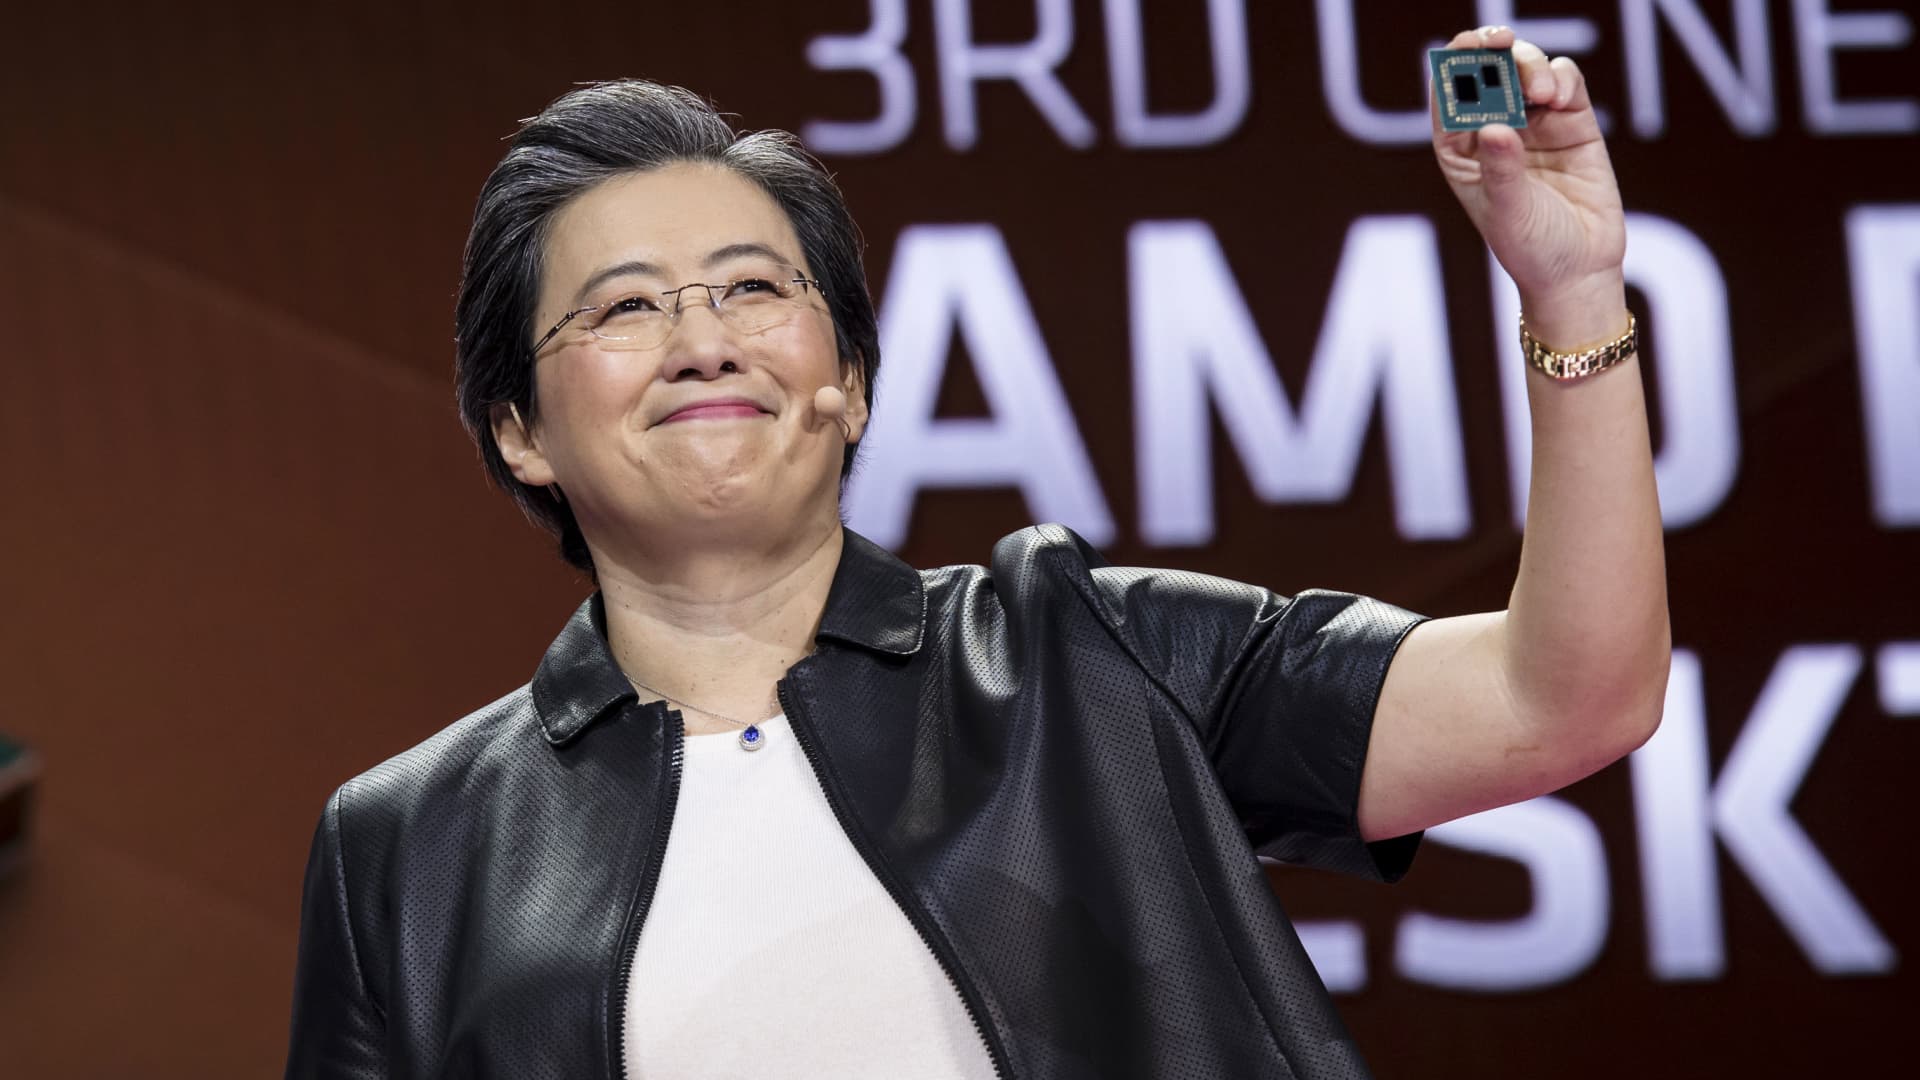 AMD shares fall more than 7% on weak outlook